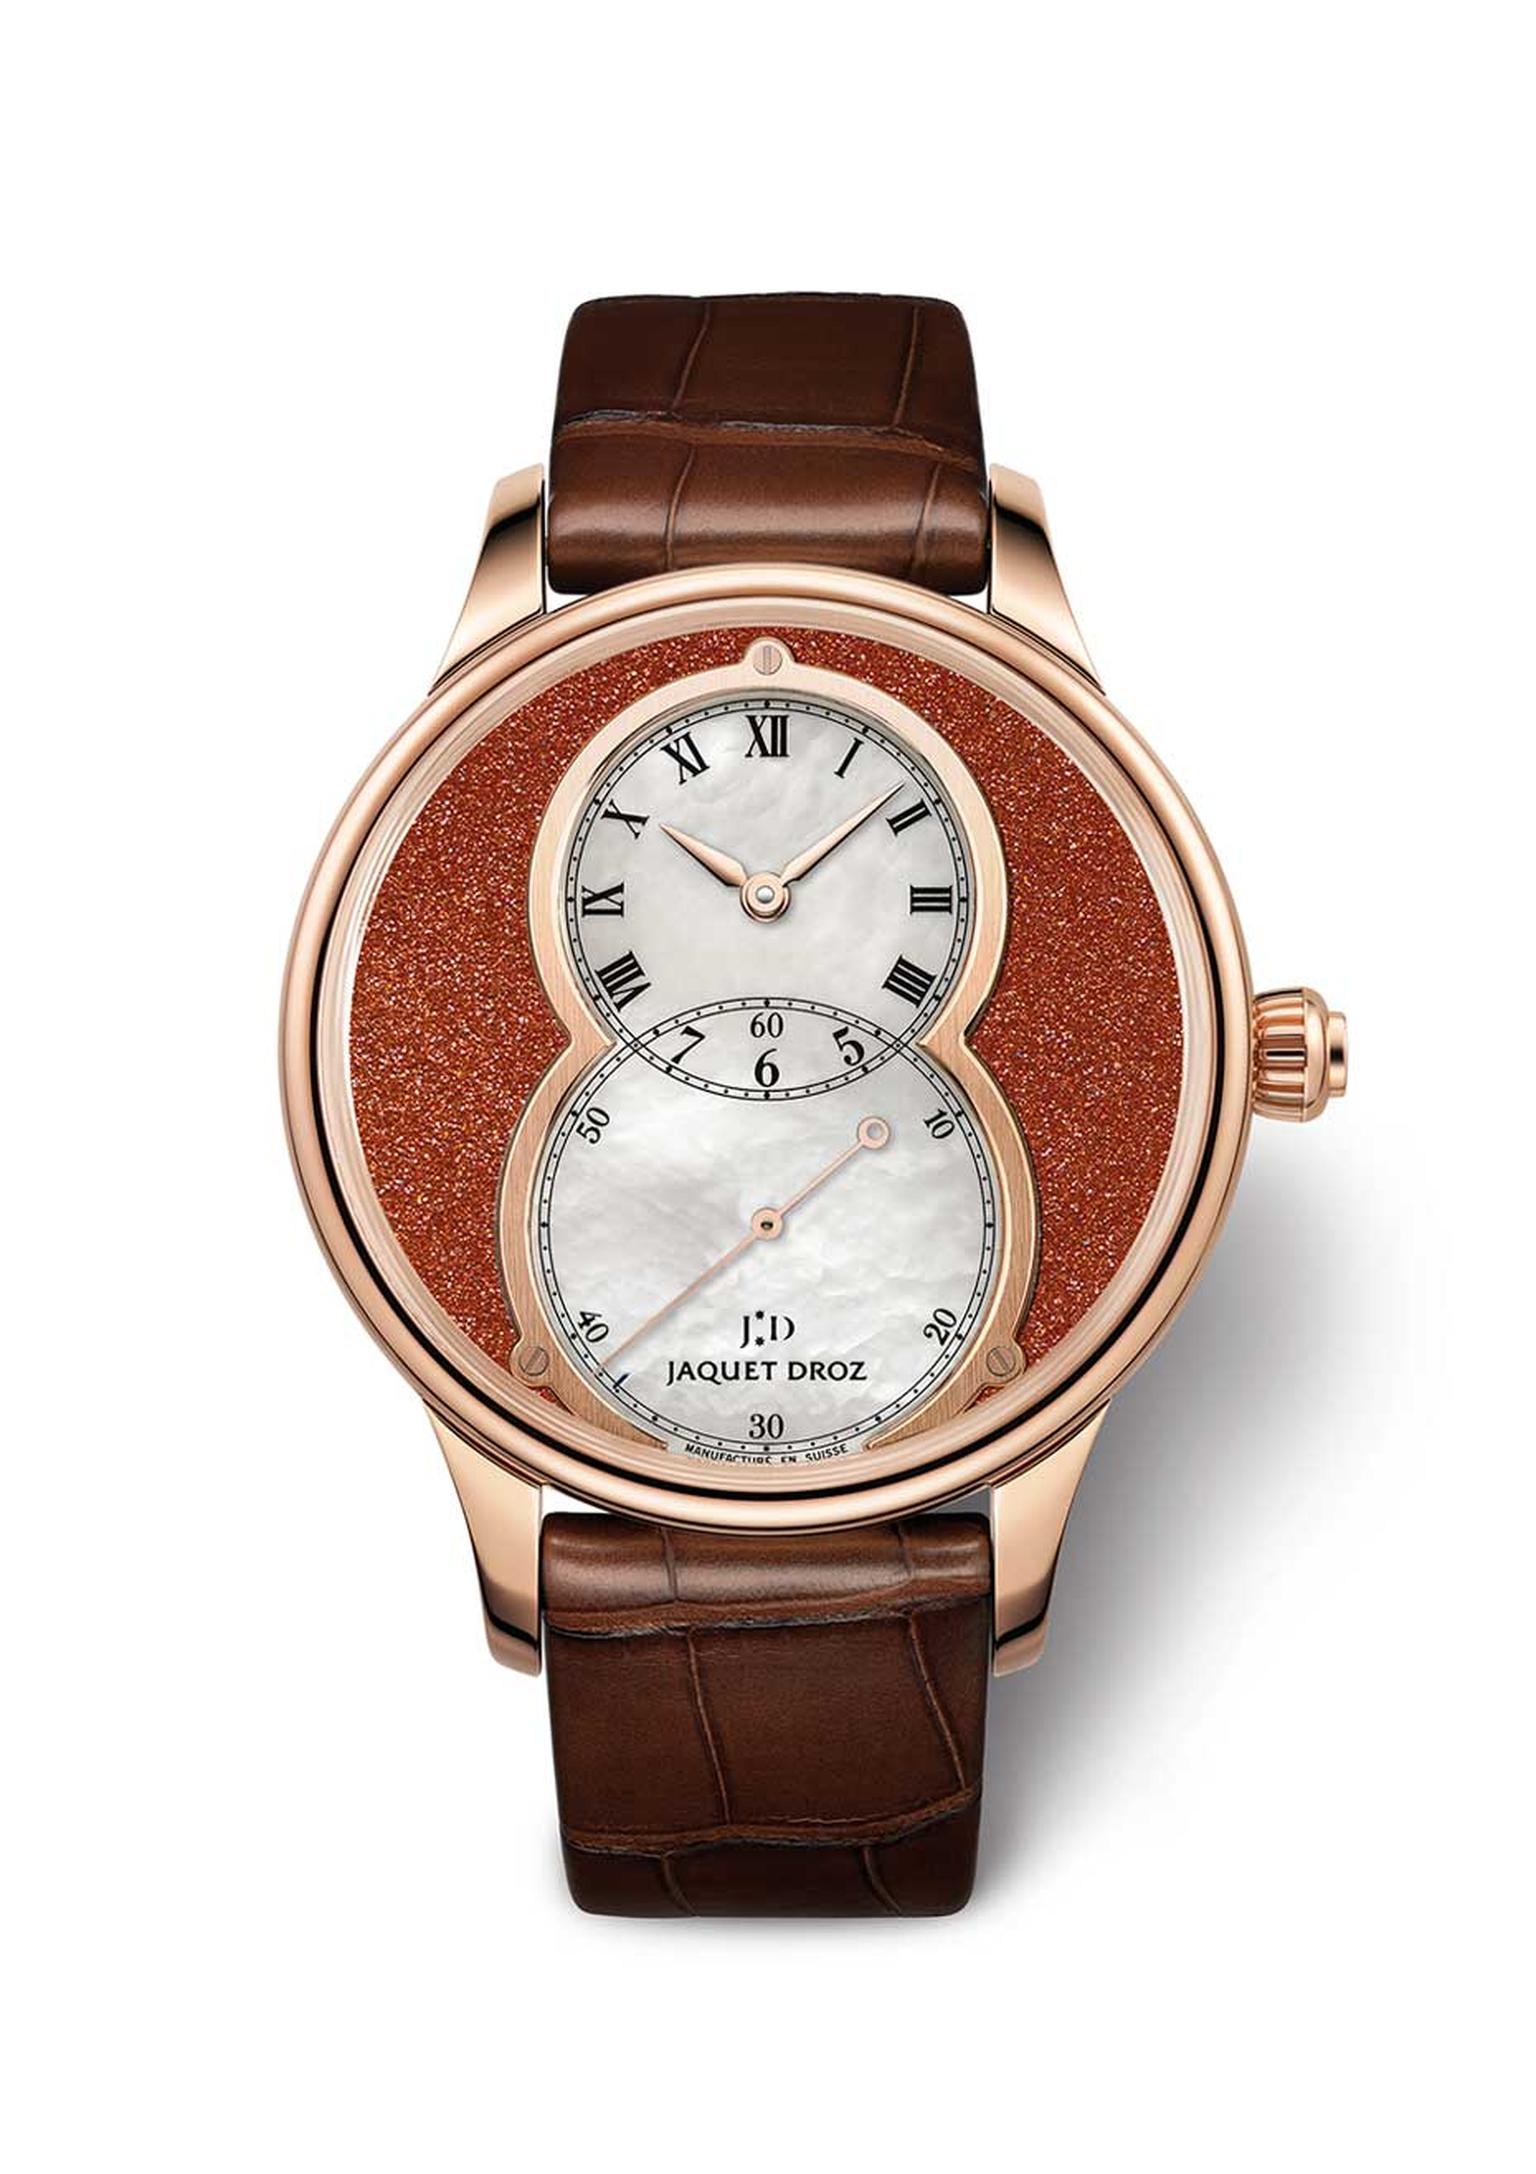 Jaquet Droz Grande Seconde Sunstone watch is characterised by its overlapping dials forming a figure eight. The outer Sunstone dial is offset by a white mother-of-pearl subdial, which indicates the small seconds. Presented in a 39mm rose gold case, this w